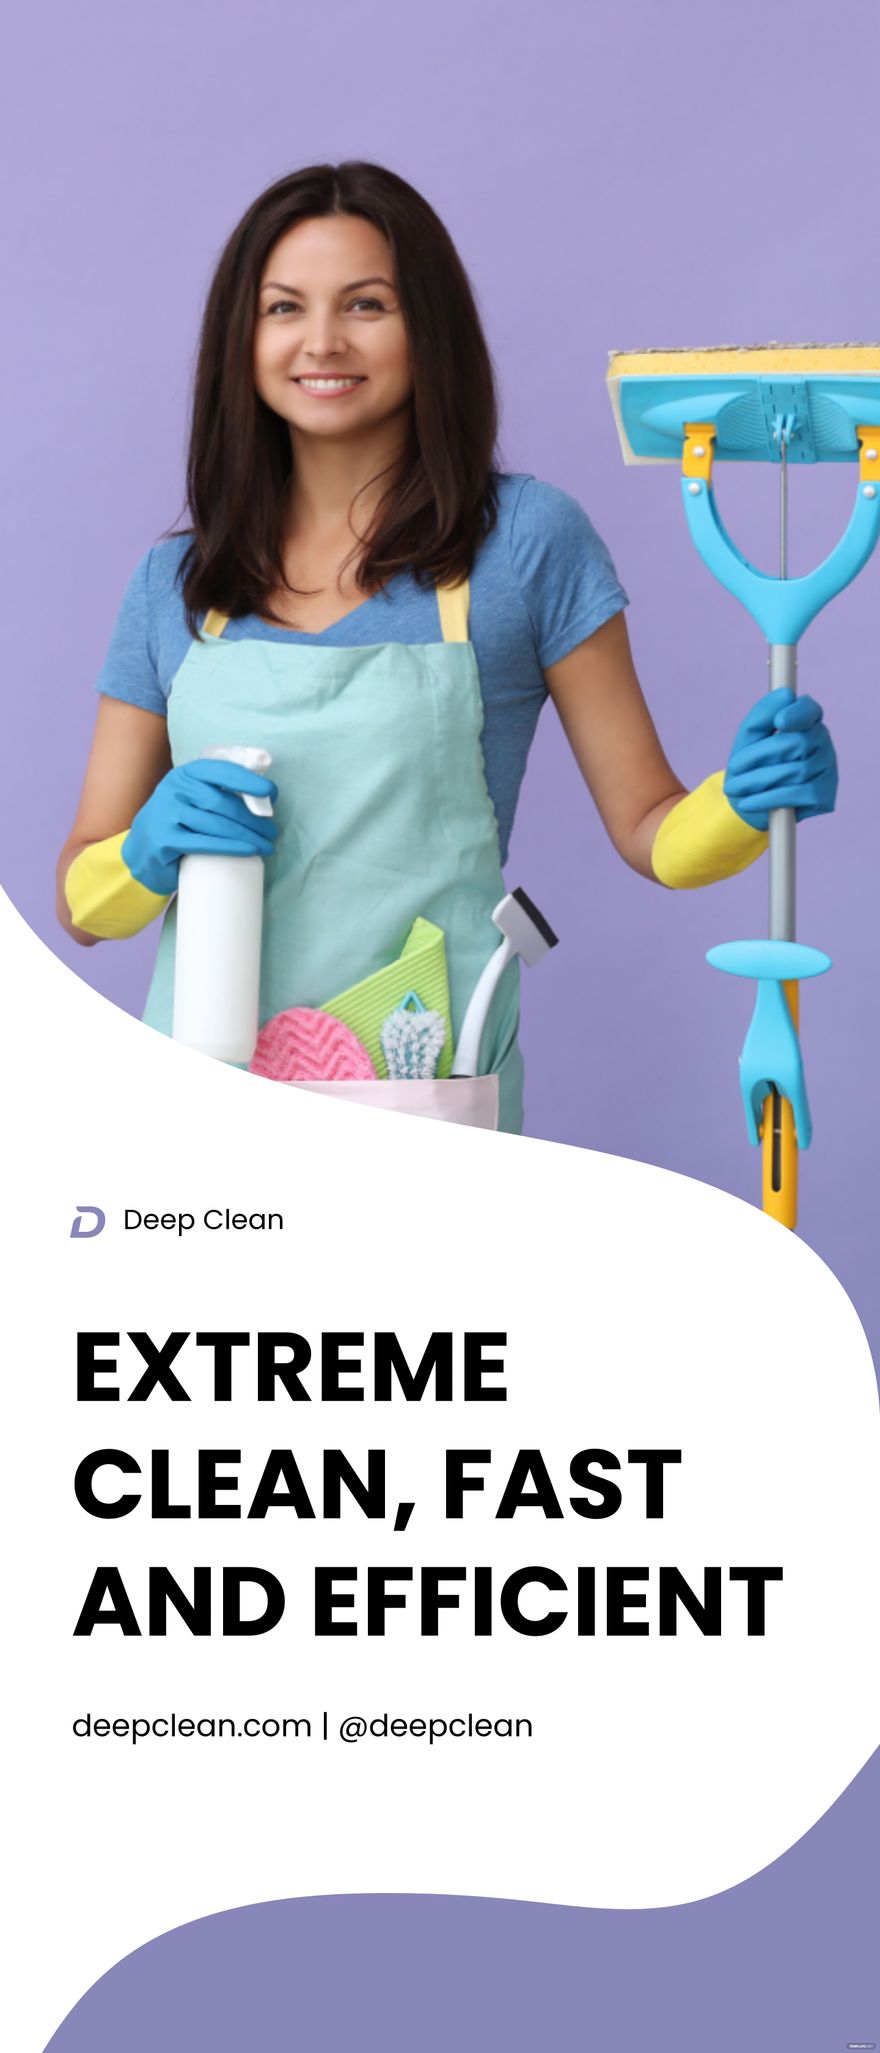 Elegant Cleaning Services Rollup Banner Template